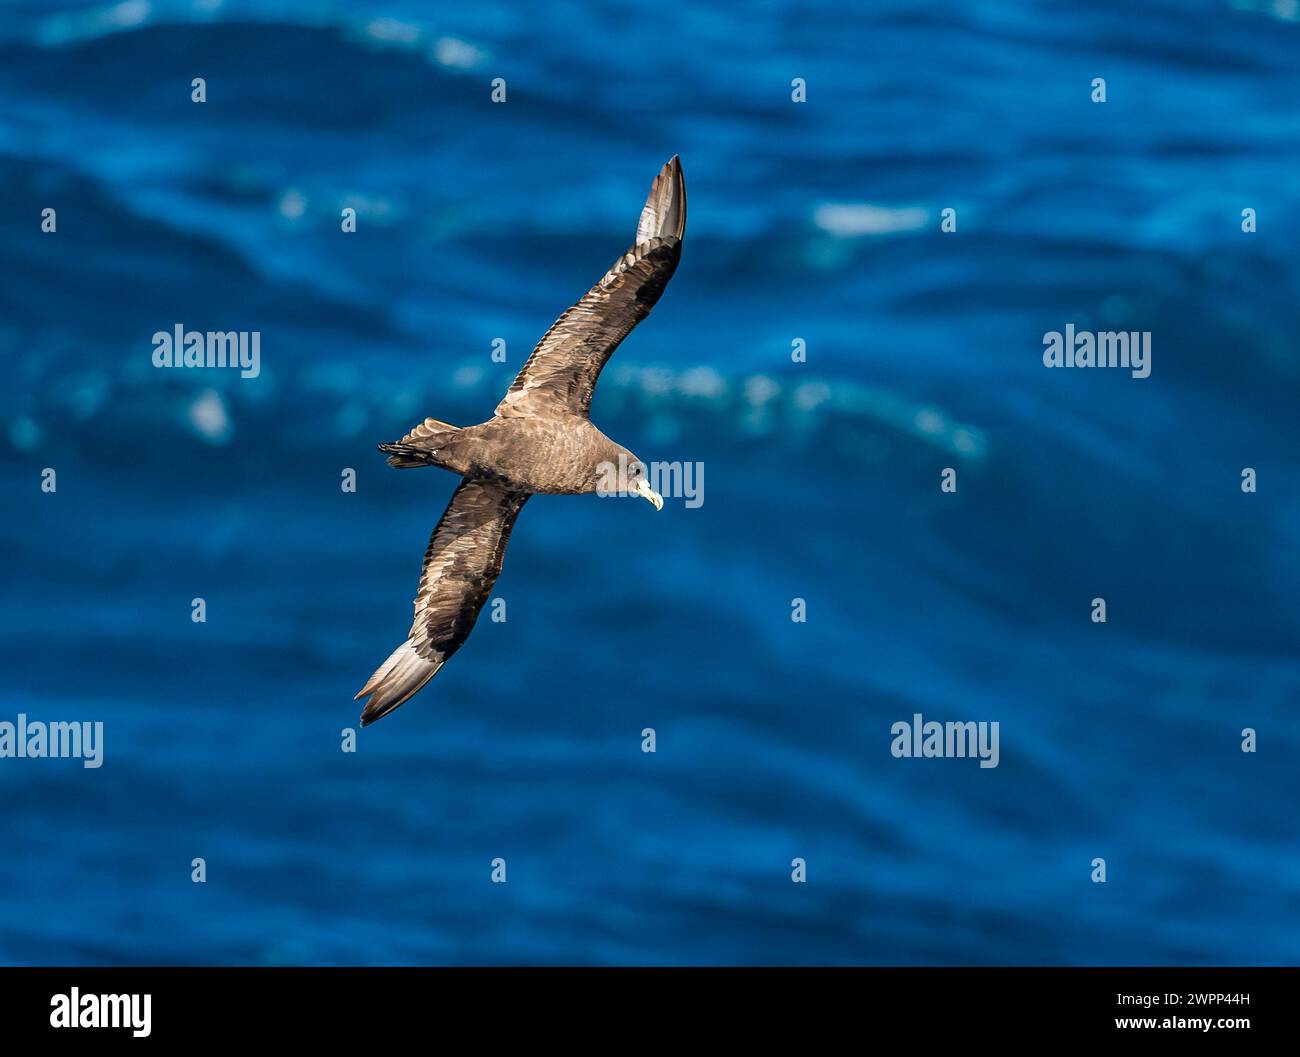 A White-chinned Petrel (Procellaria aequinoctialis) flying over ocean. Pacific Ocean, off the coast of Chile. Stock Photo